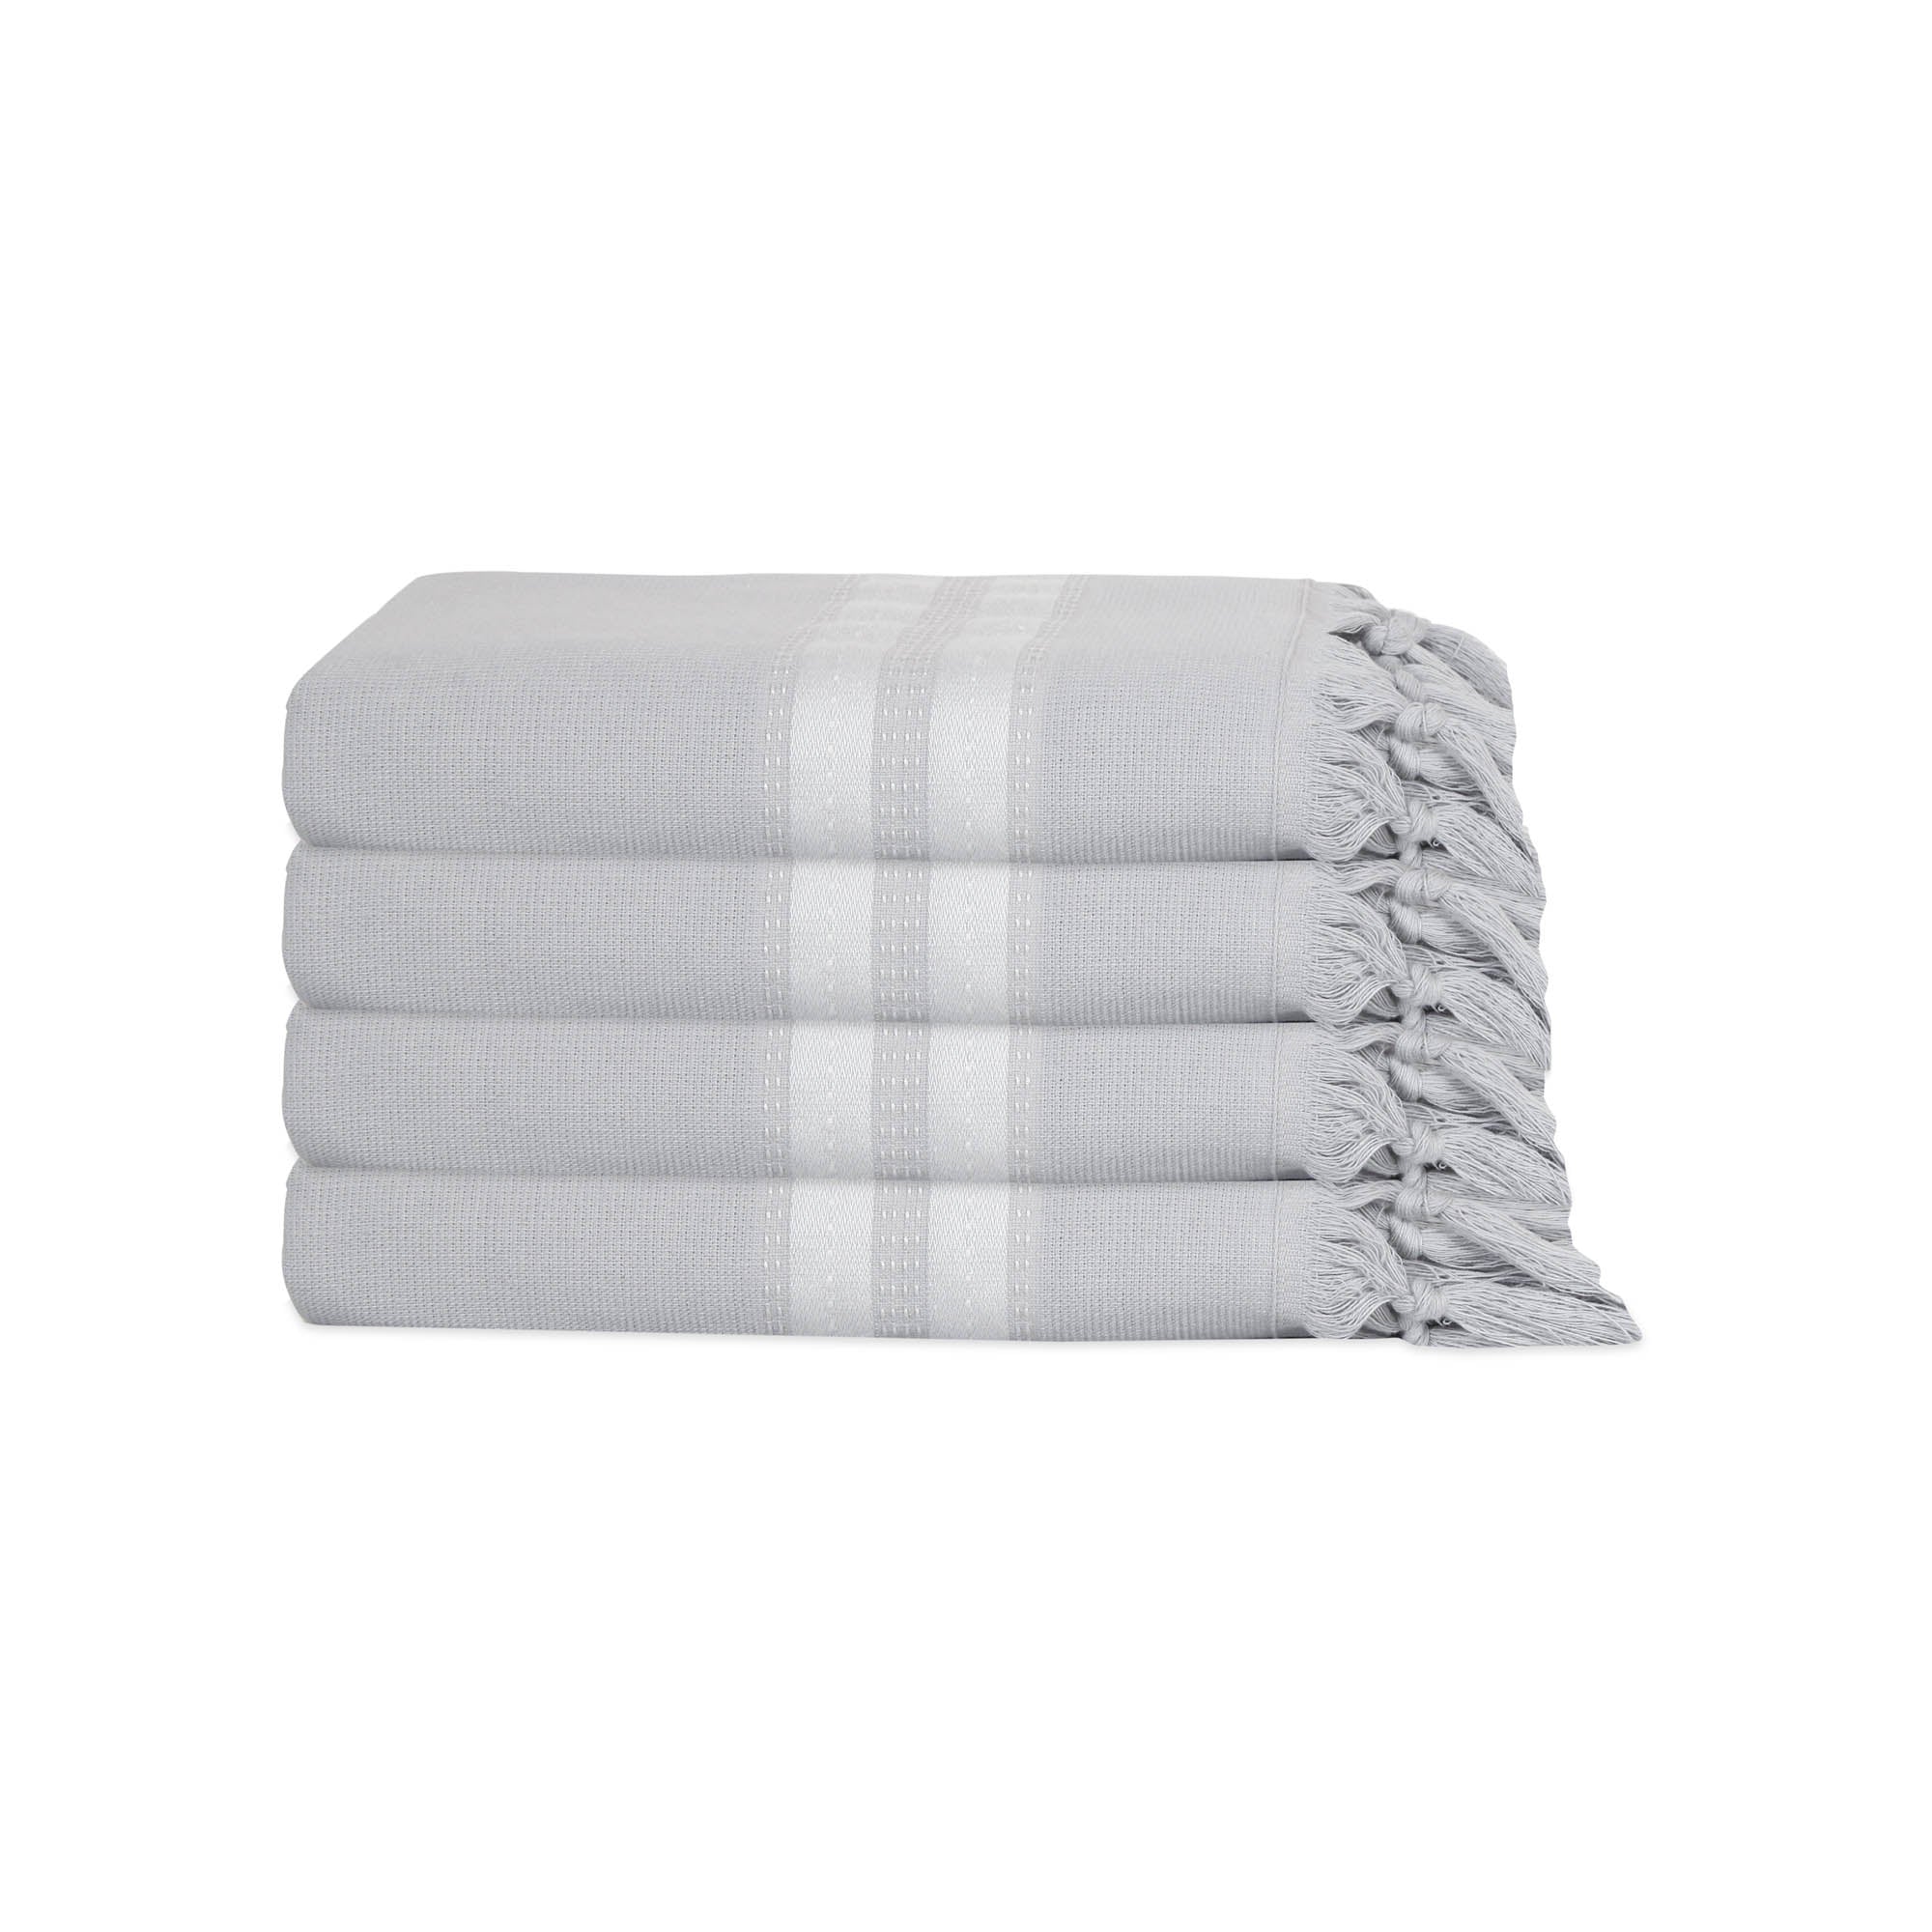 Bliss Turkish Hand / Kitchen Towel Bundle - Olive and Linen